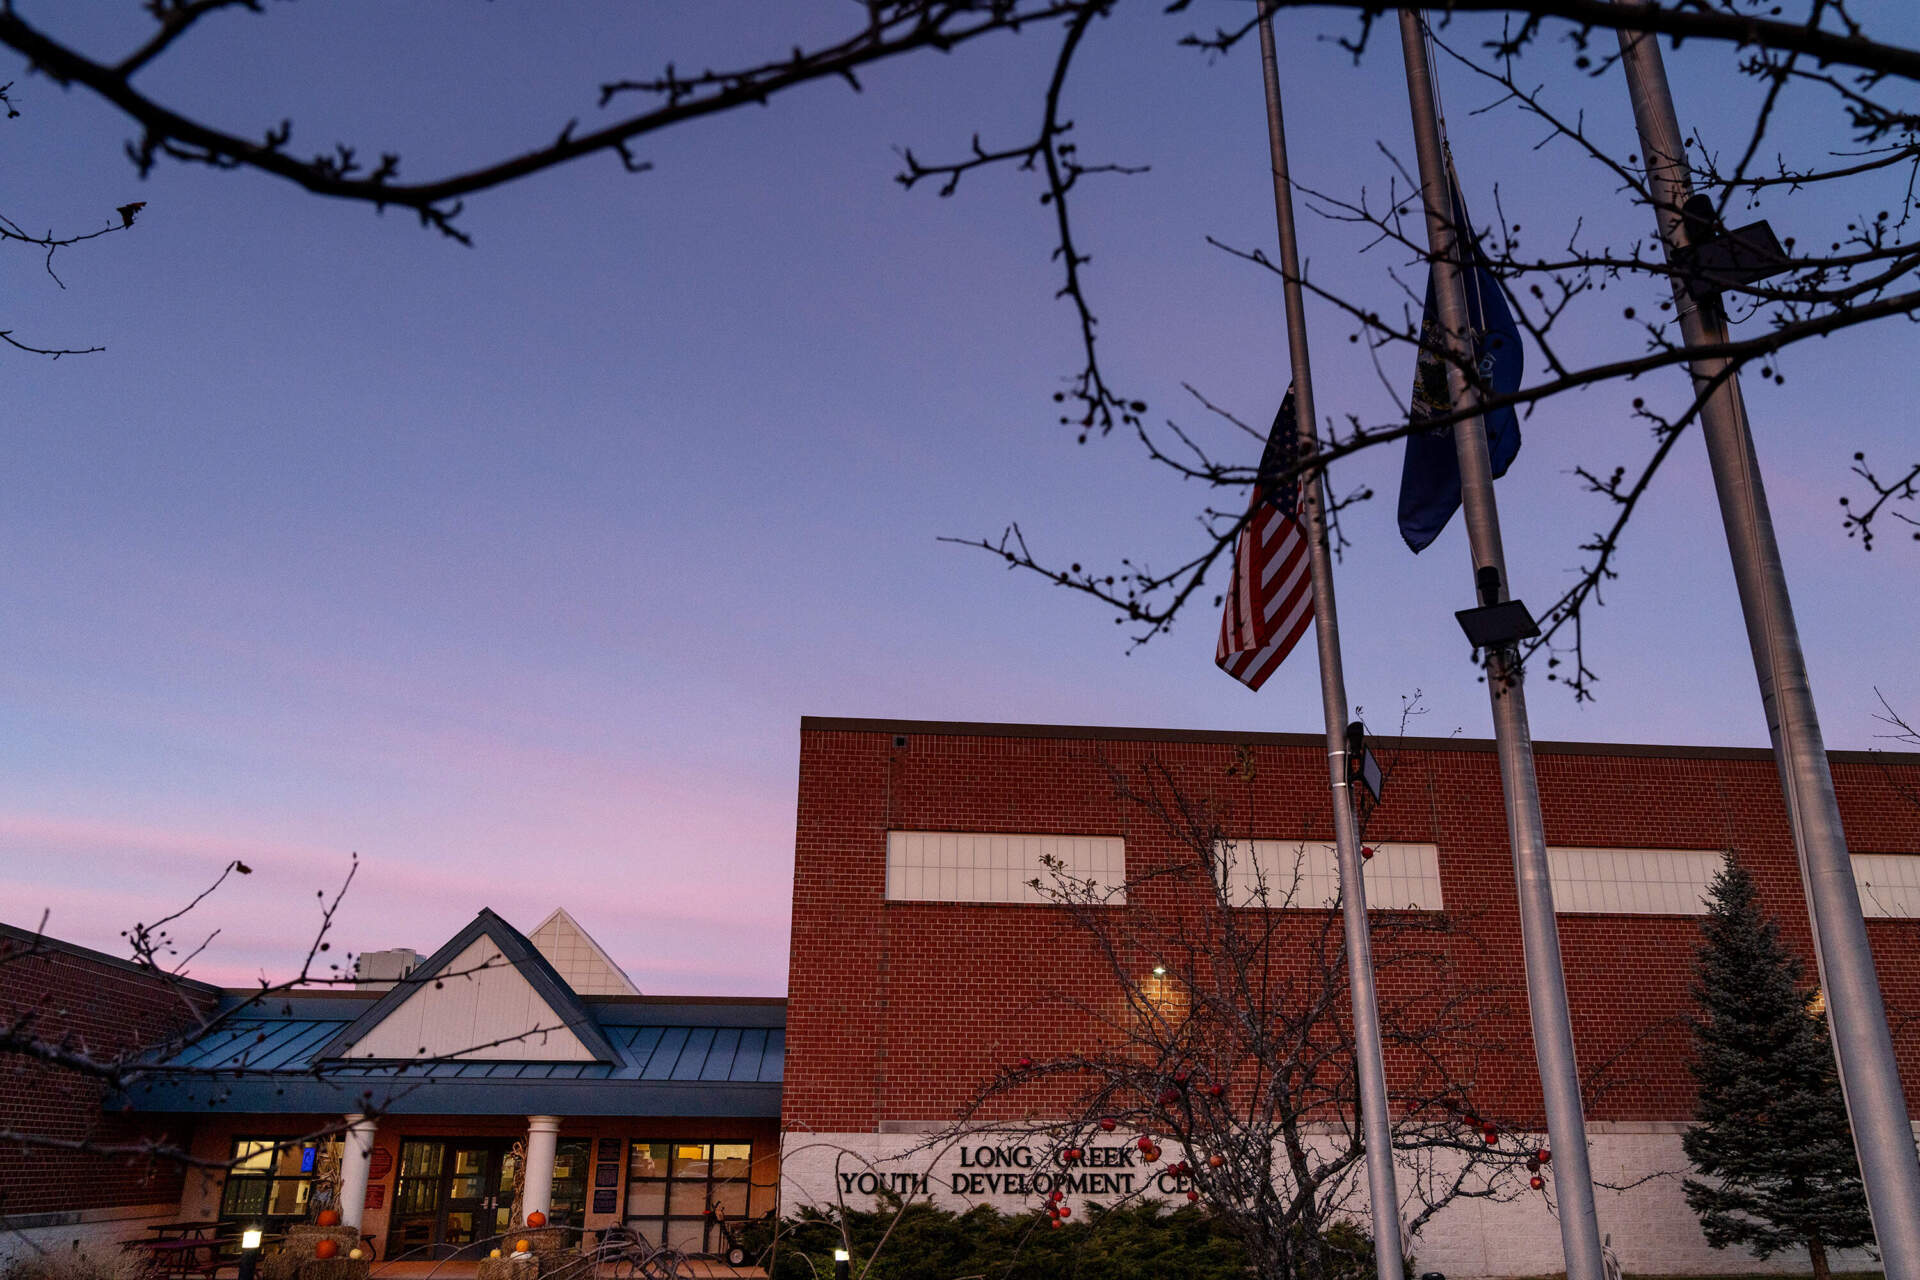 Long Creek Youth Development Center, in South Portland, is Maine’s only juvenile prison. (Ashley L. Conti for The New York Times)